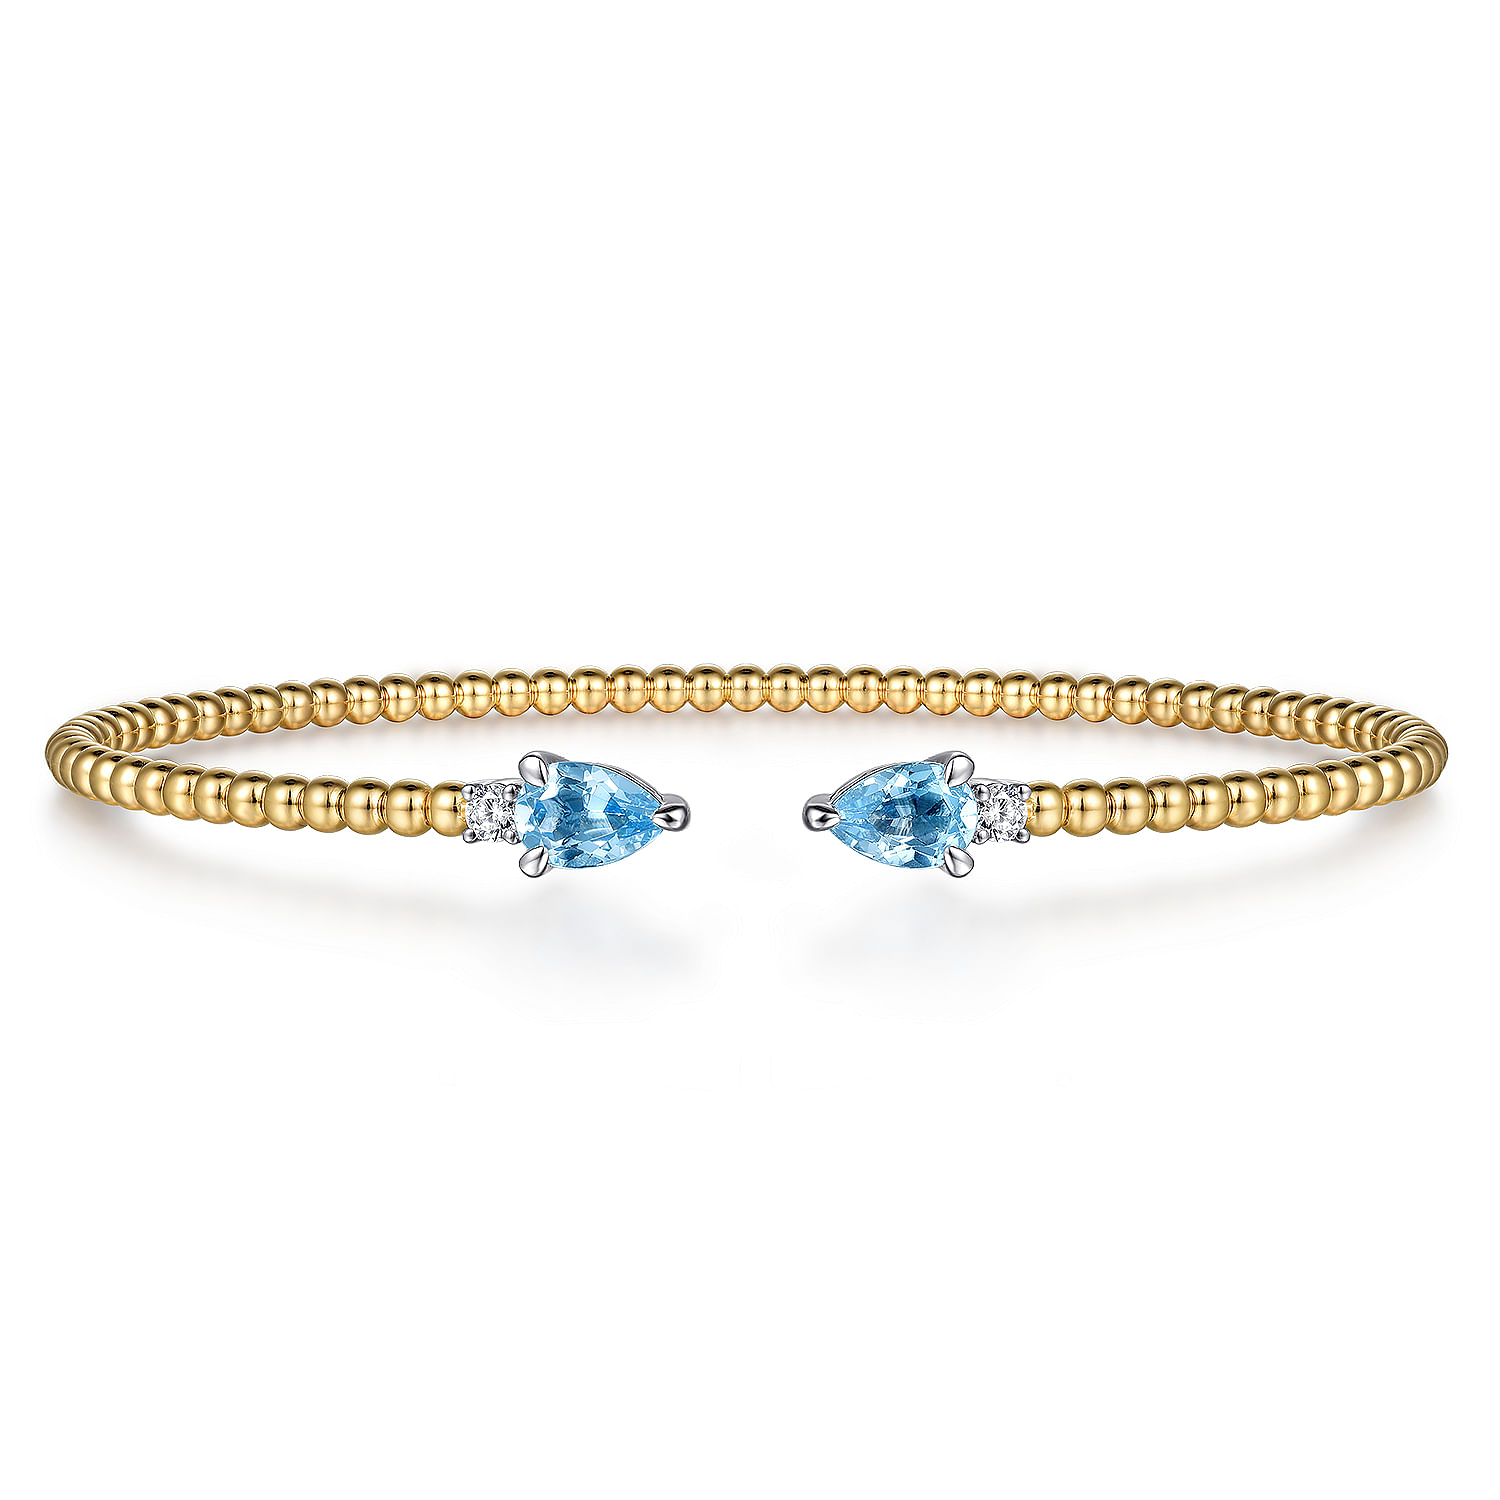 14K White & Yellow Gold Bujukan Open Cuff Bracelet with Blue Topaz and Diamond End Caps